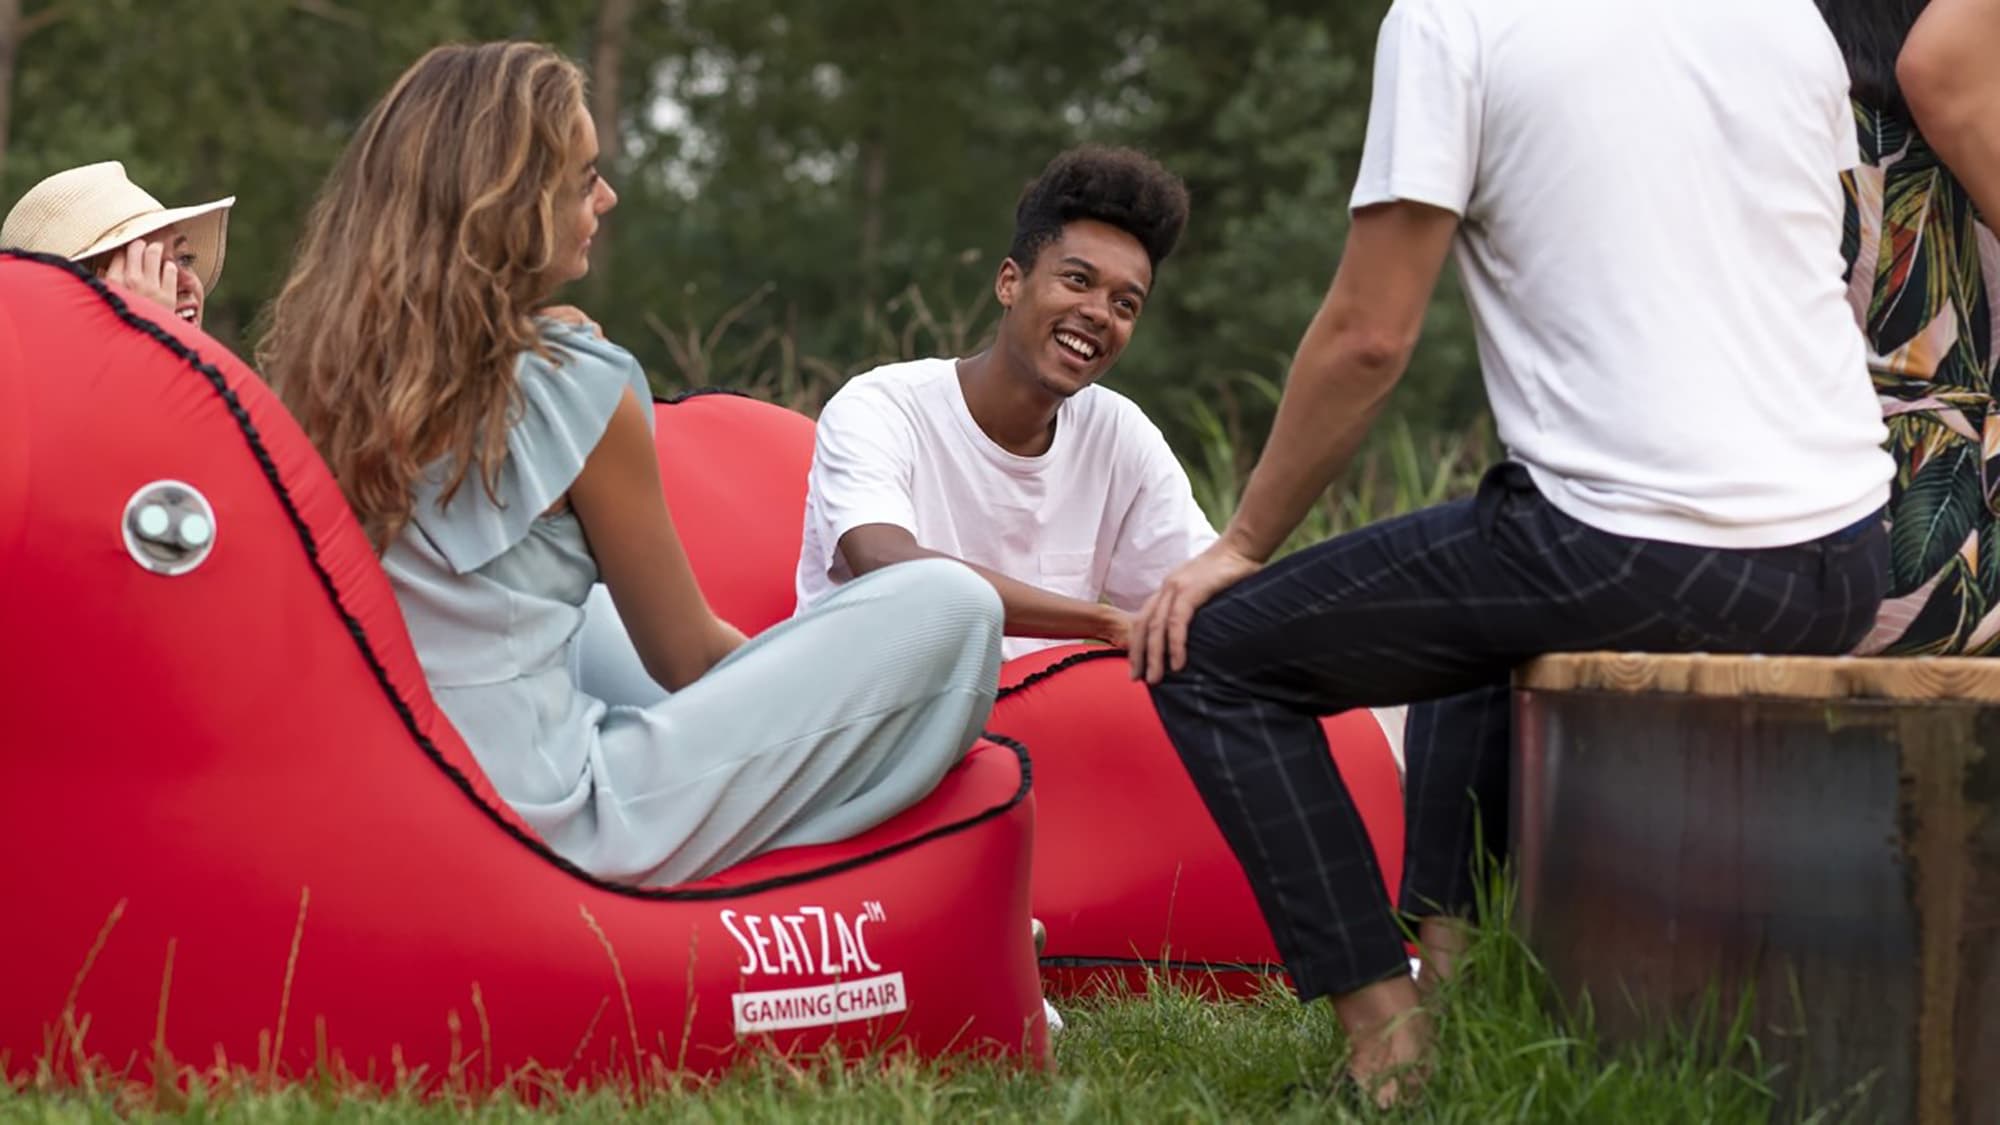 This self-inflating chair makes it easy to relax and have fun